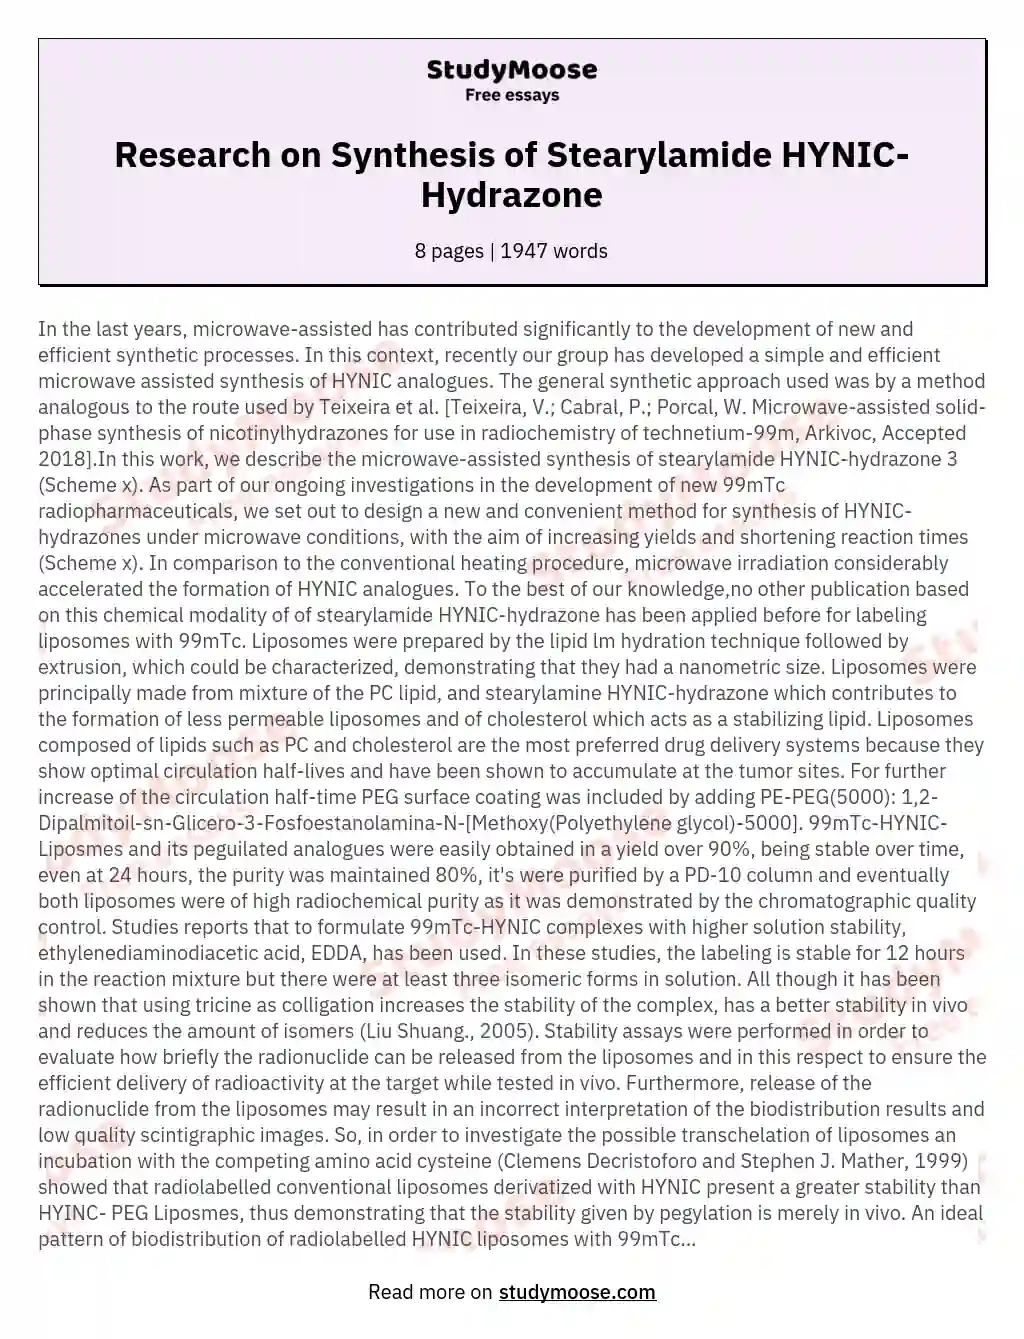 Research on Synthesis of Stearylamide HYNIC-Hydrazone essay